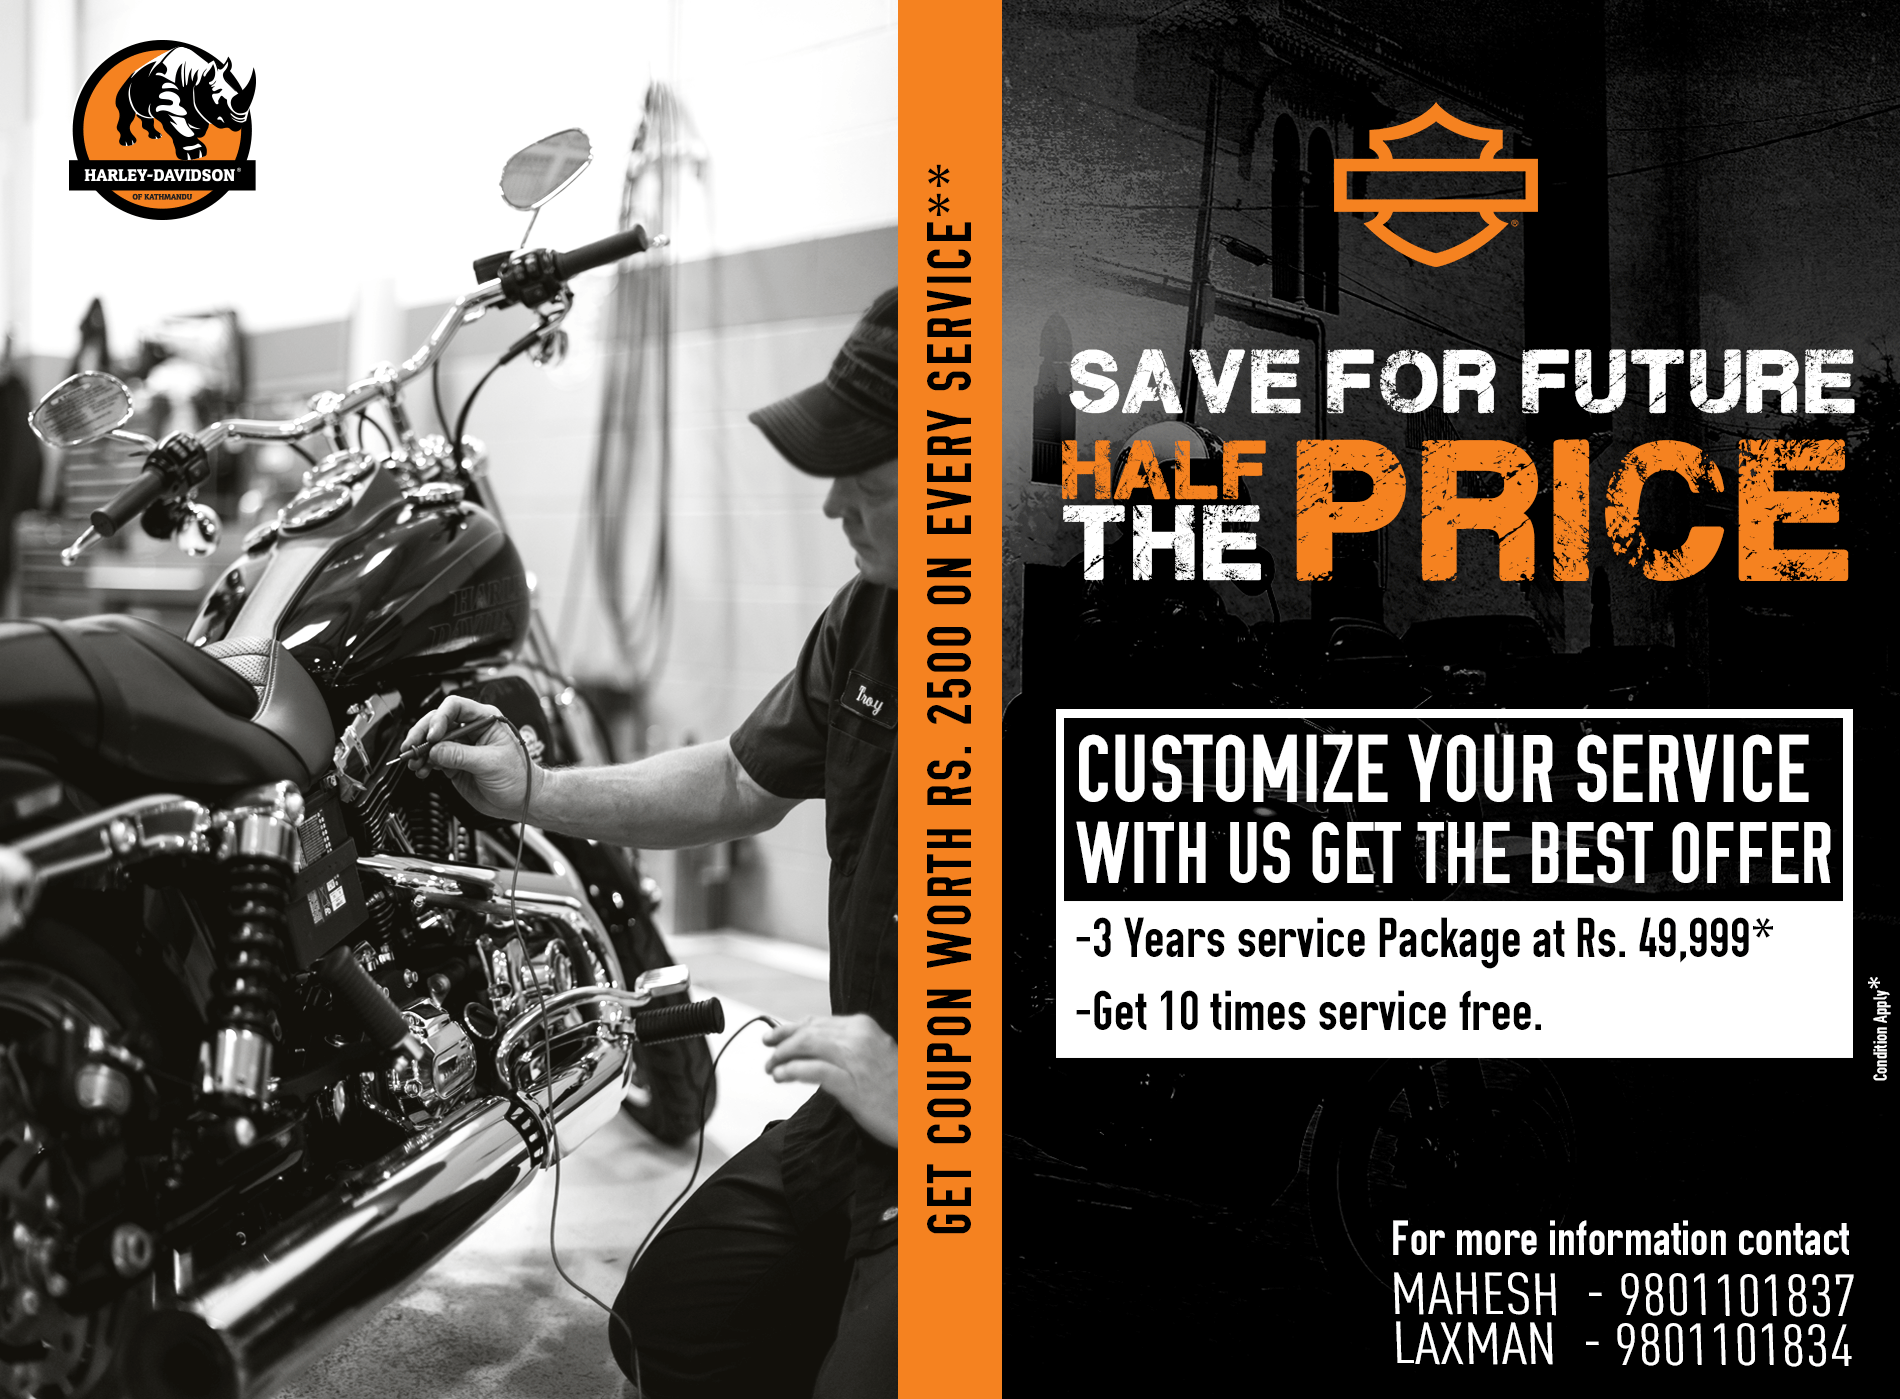 Harley Davidson Bikes In Nepal Schemes Offers Deals And Discounts